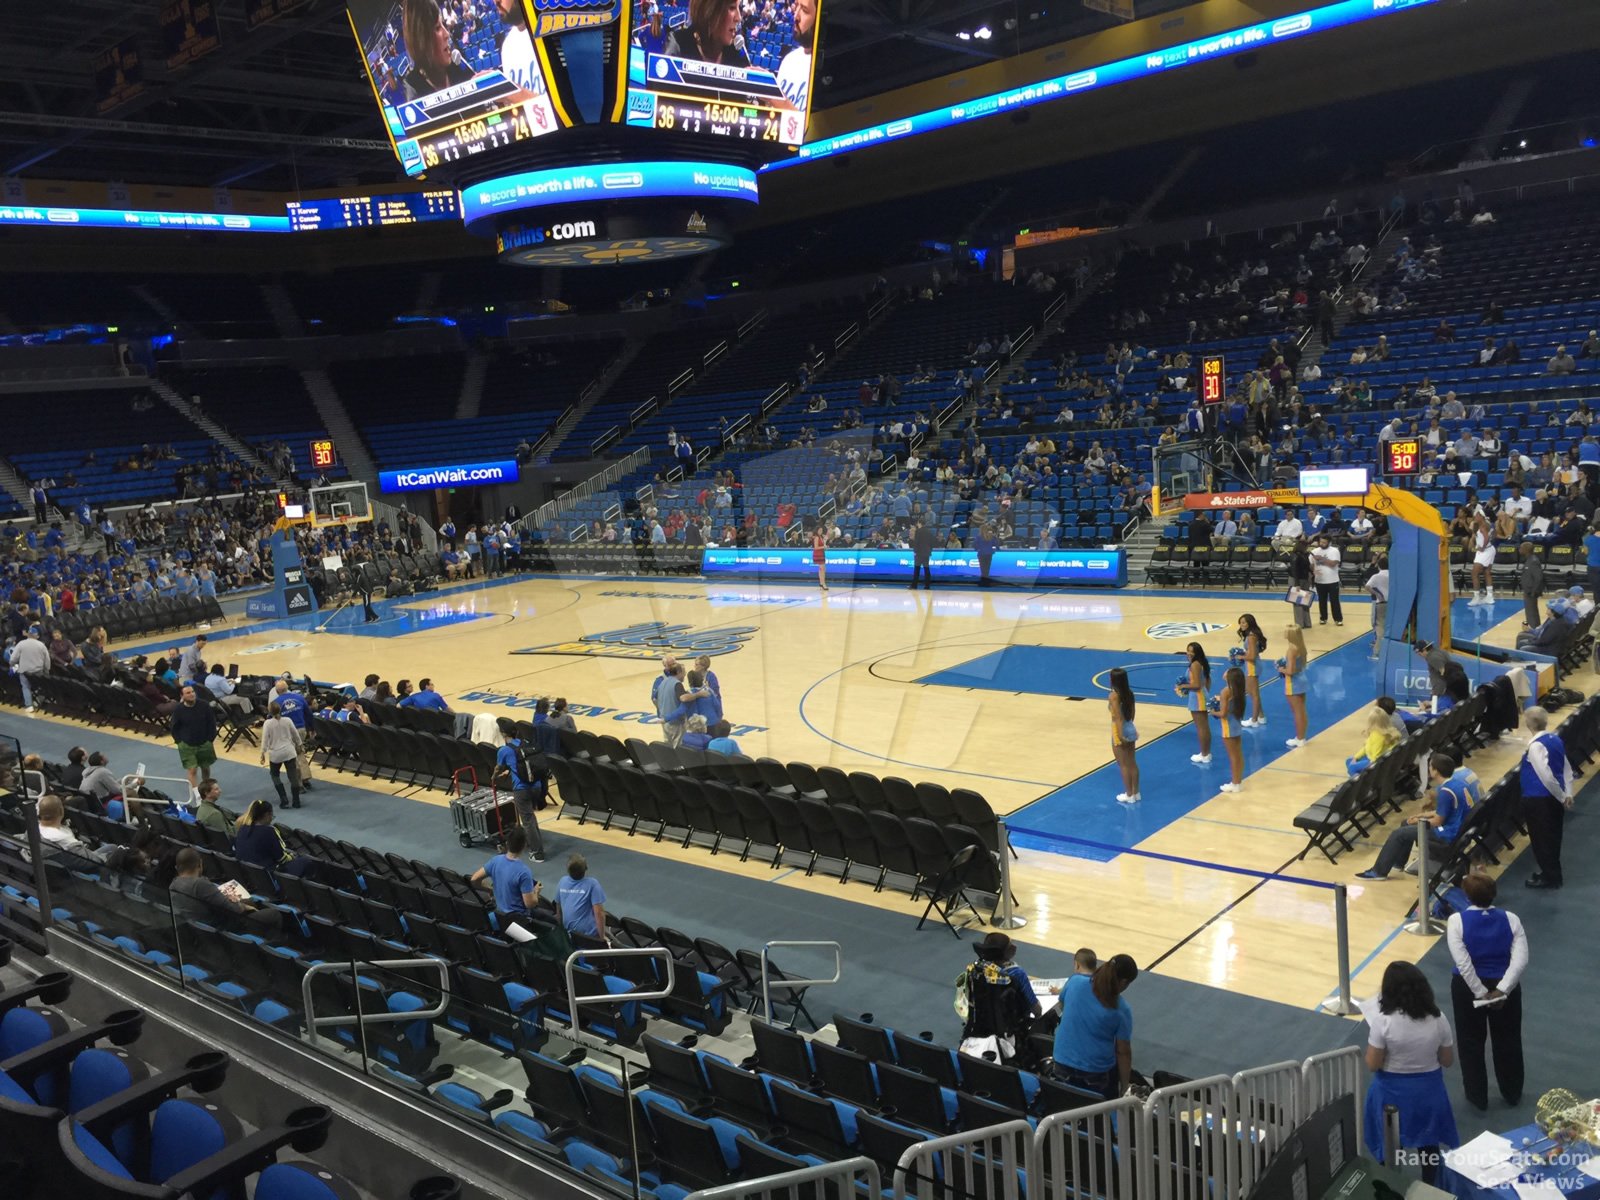 section 113, row 3 seat view  - pauley pavilion